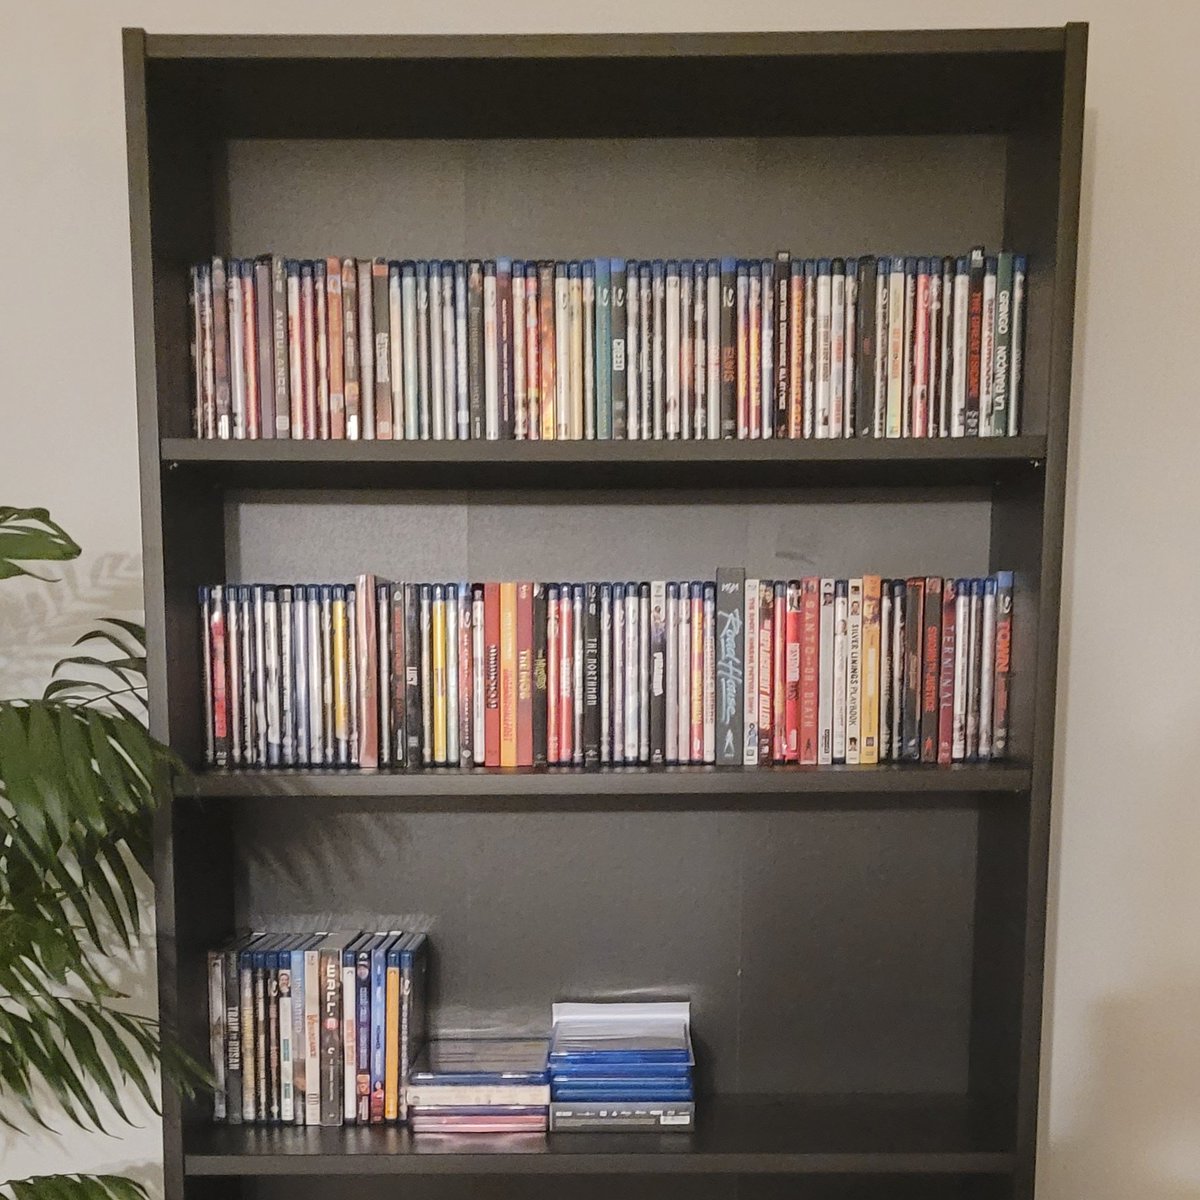 This is just an update on my movie collection. I bought a brand new shelf, organized all my movies, and I have a total of 140 movies in my collection. Let's see how many movies get added to the collection in 2023. #mymoviecollection #bluraycollection